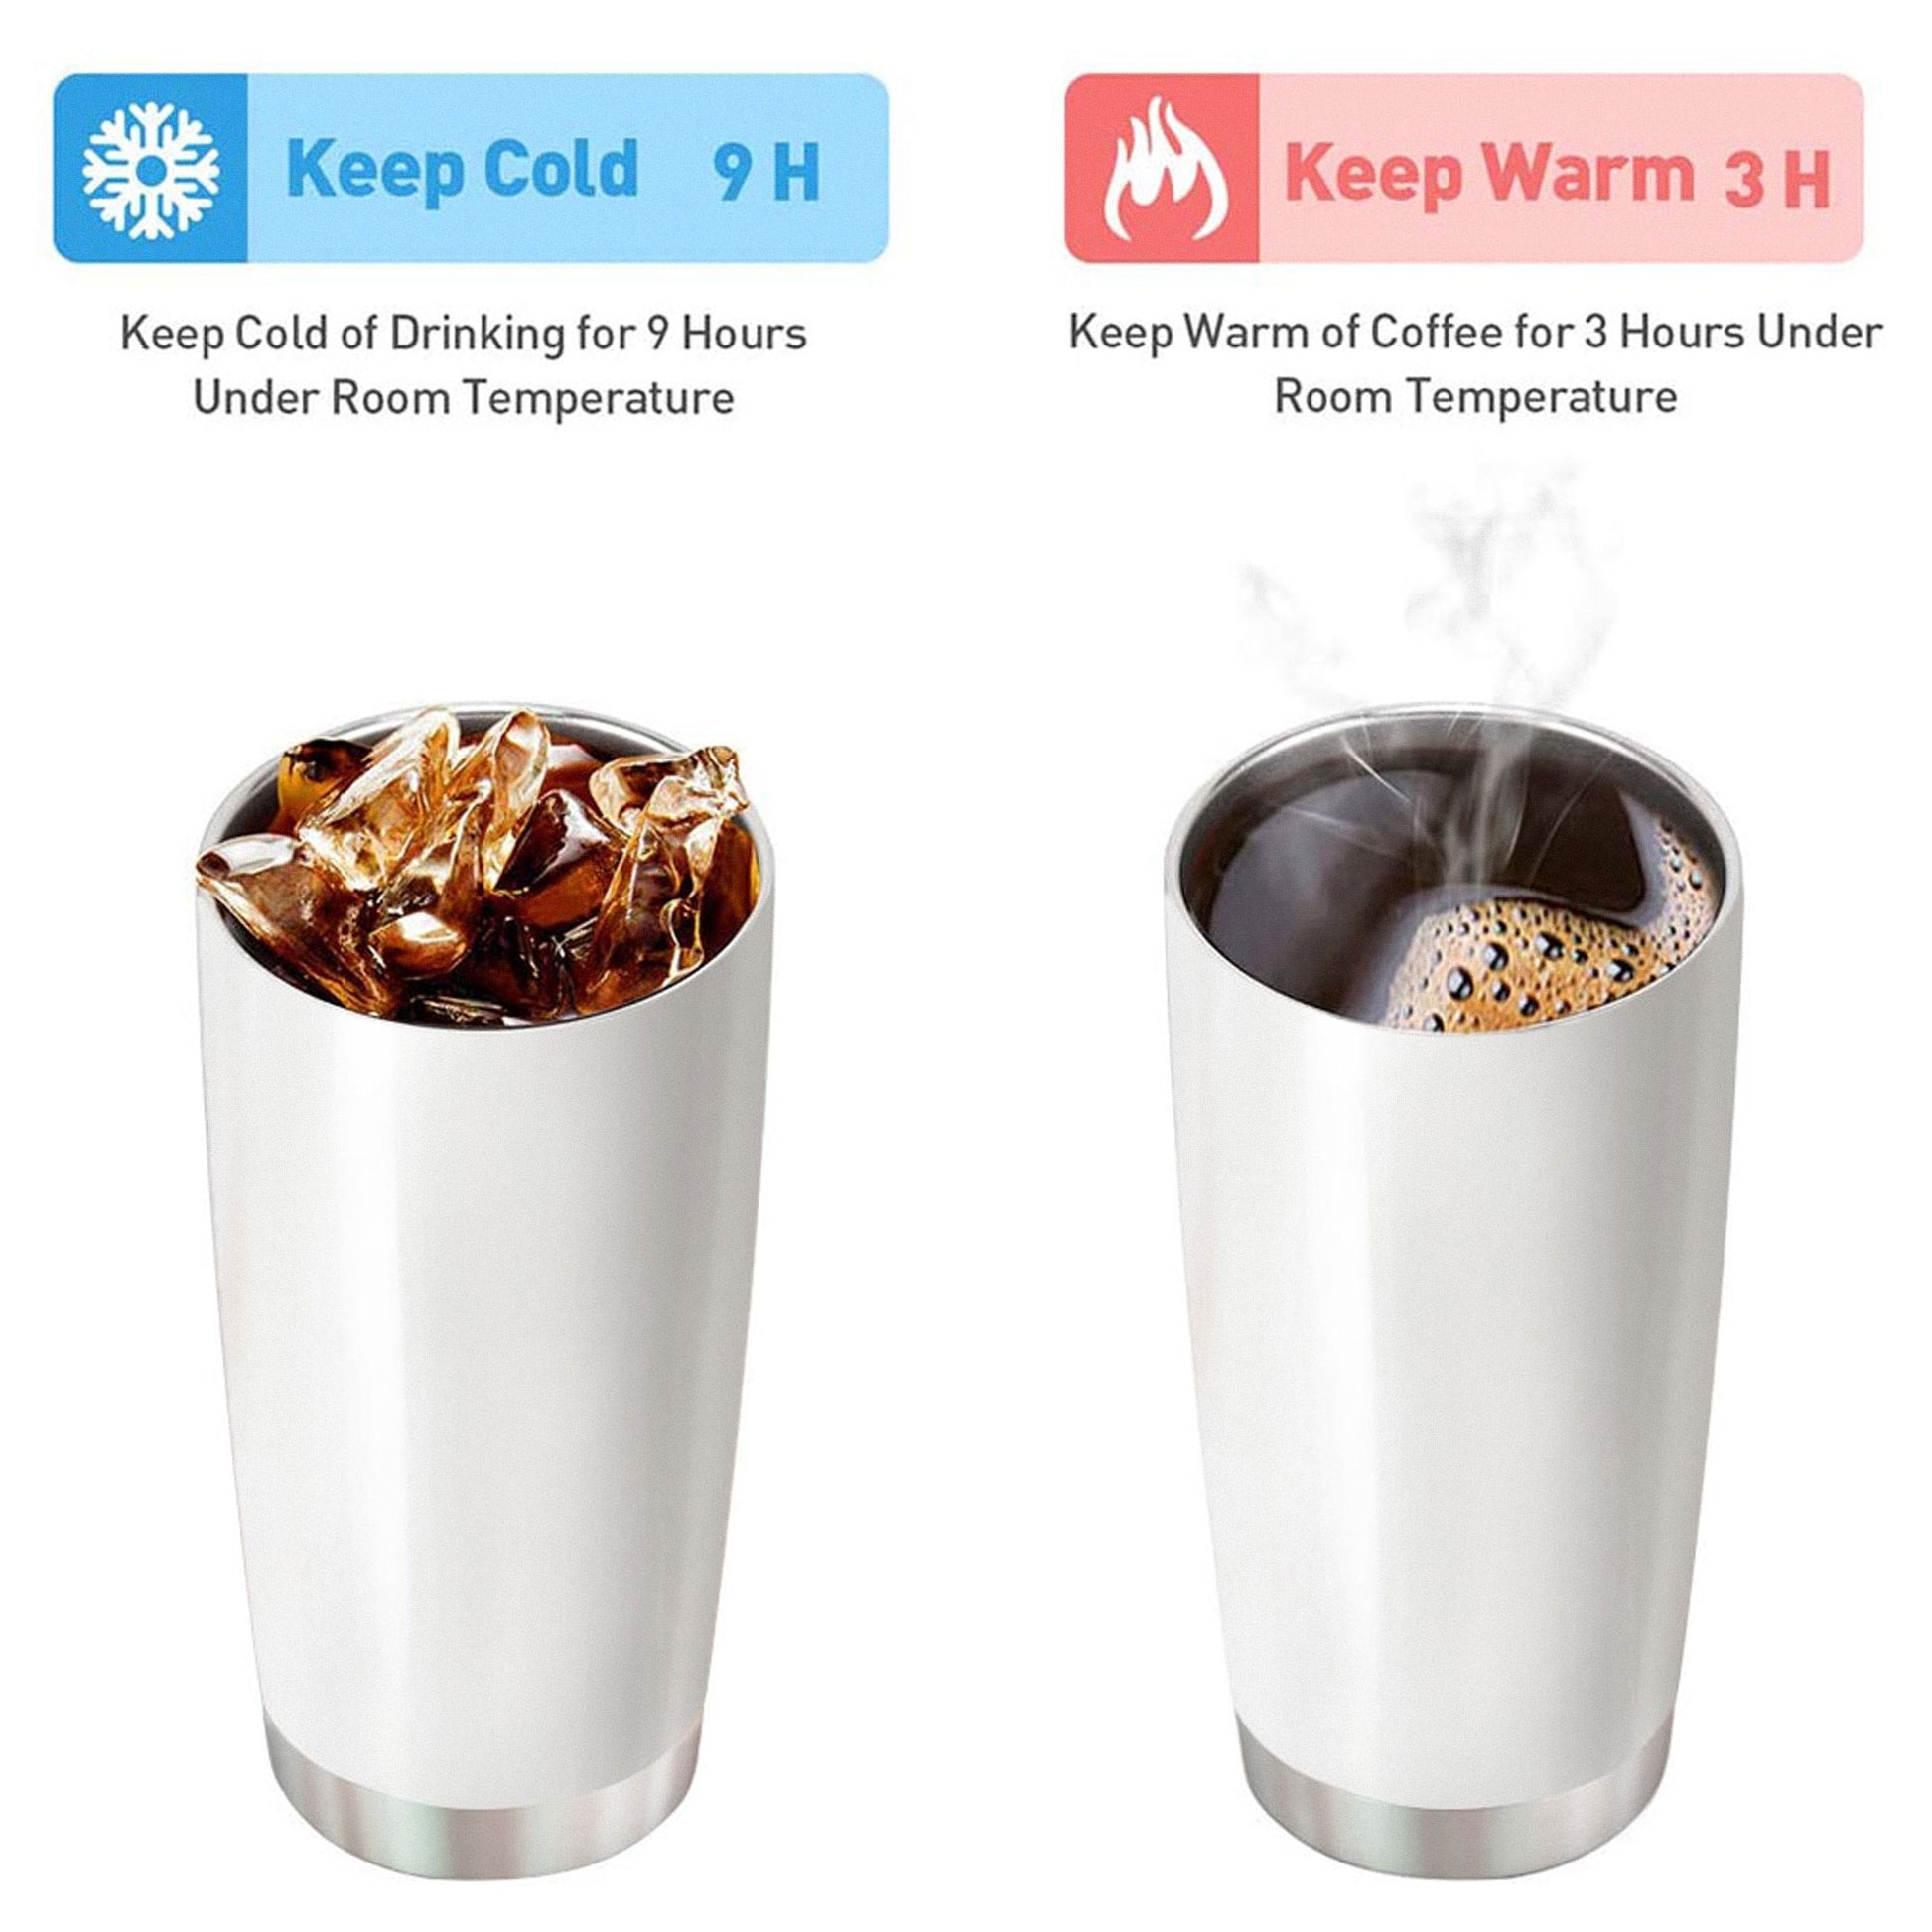 Custom Graphic Double Wall Stainless Steel Tumbler Mug with Straw